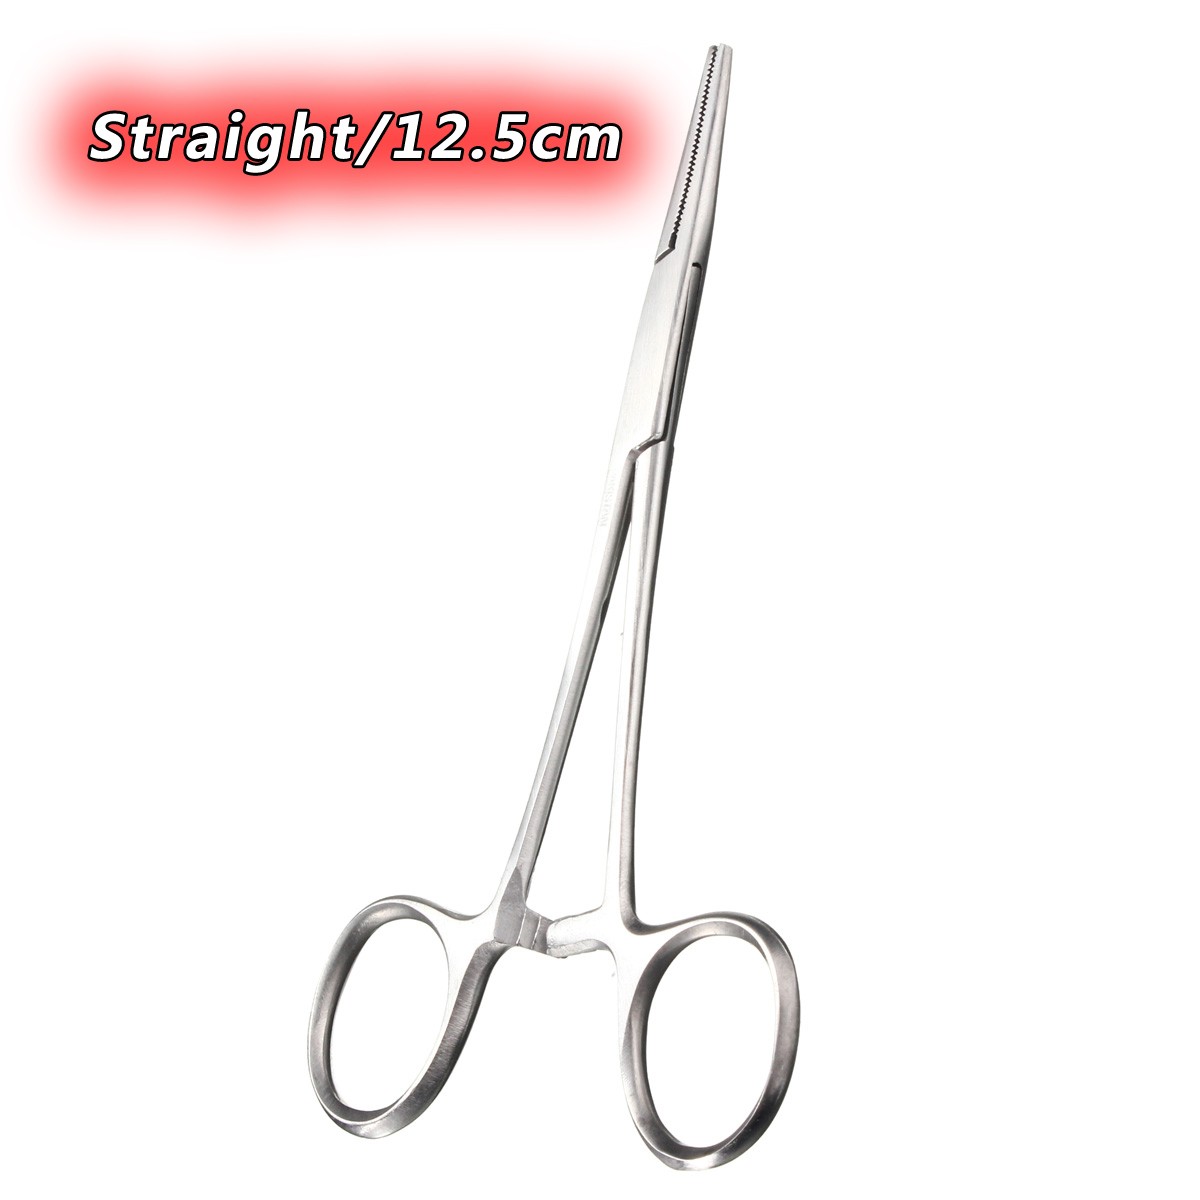 Hemostat-Forceps-Straight-Curved-Stainless-Steel-Locking-Clamp-1039903-3